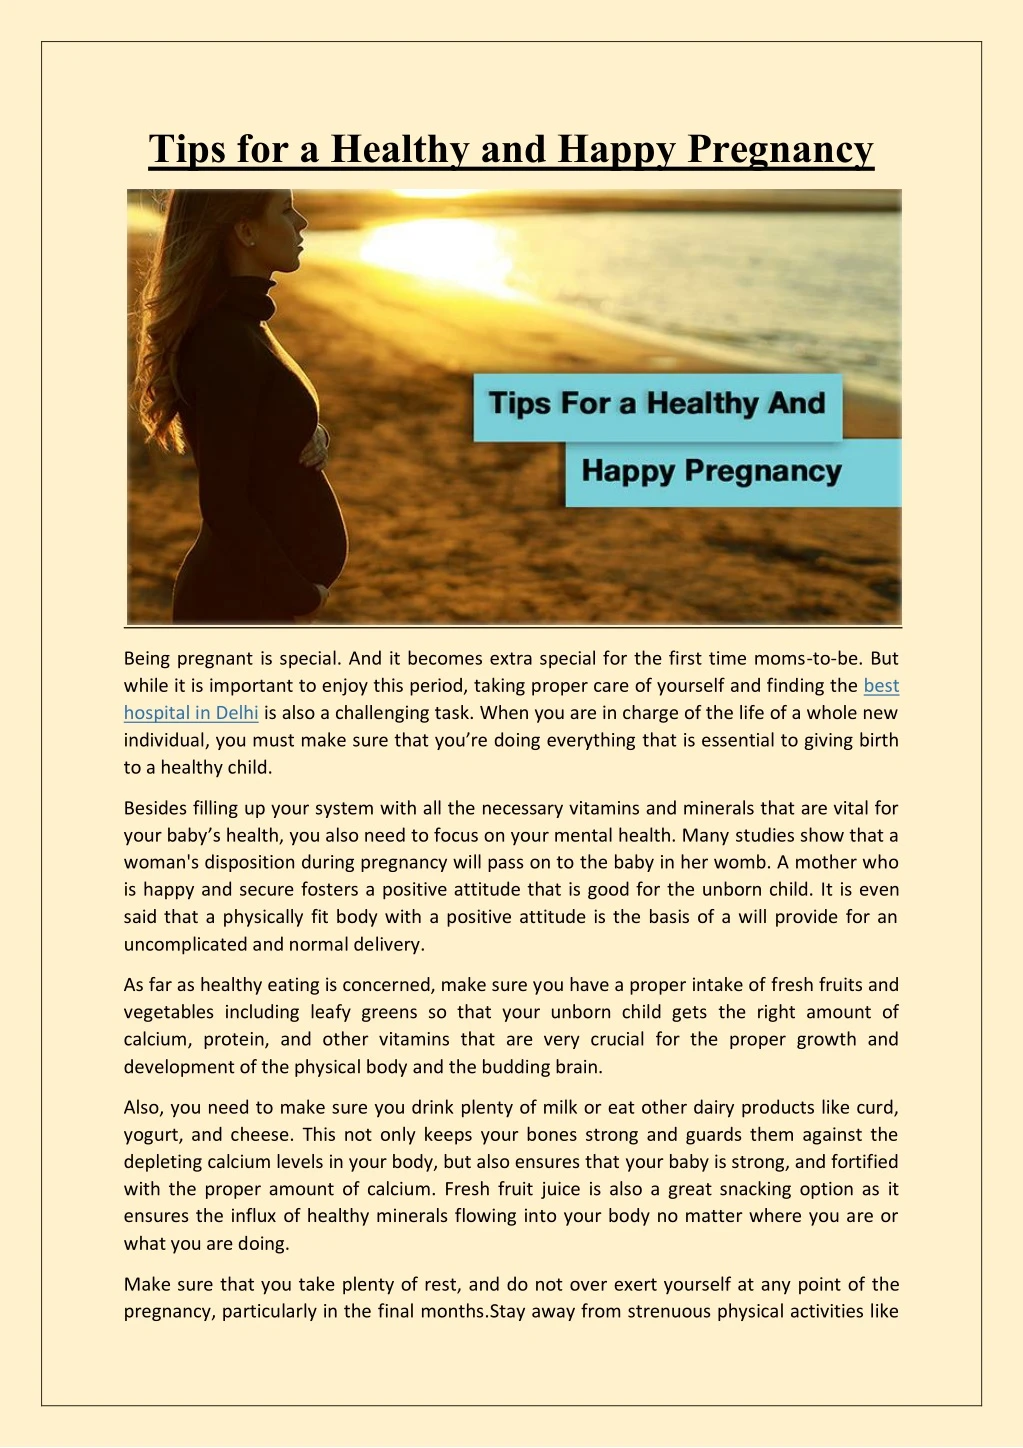 tips for a healthy and happy pregnancy